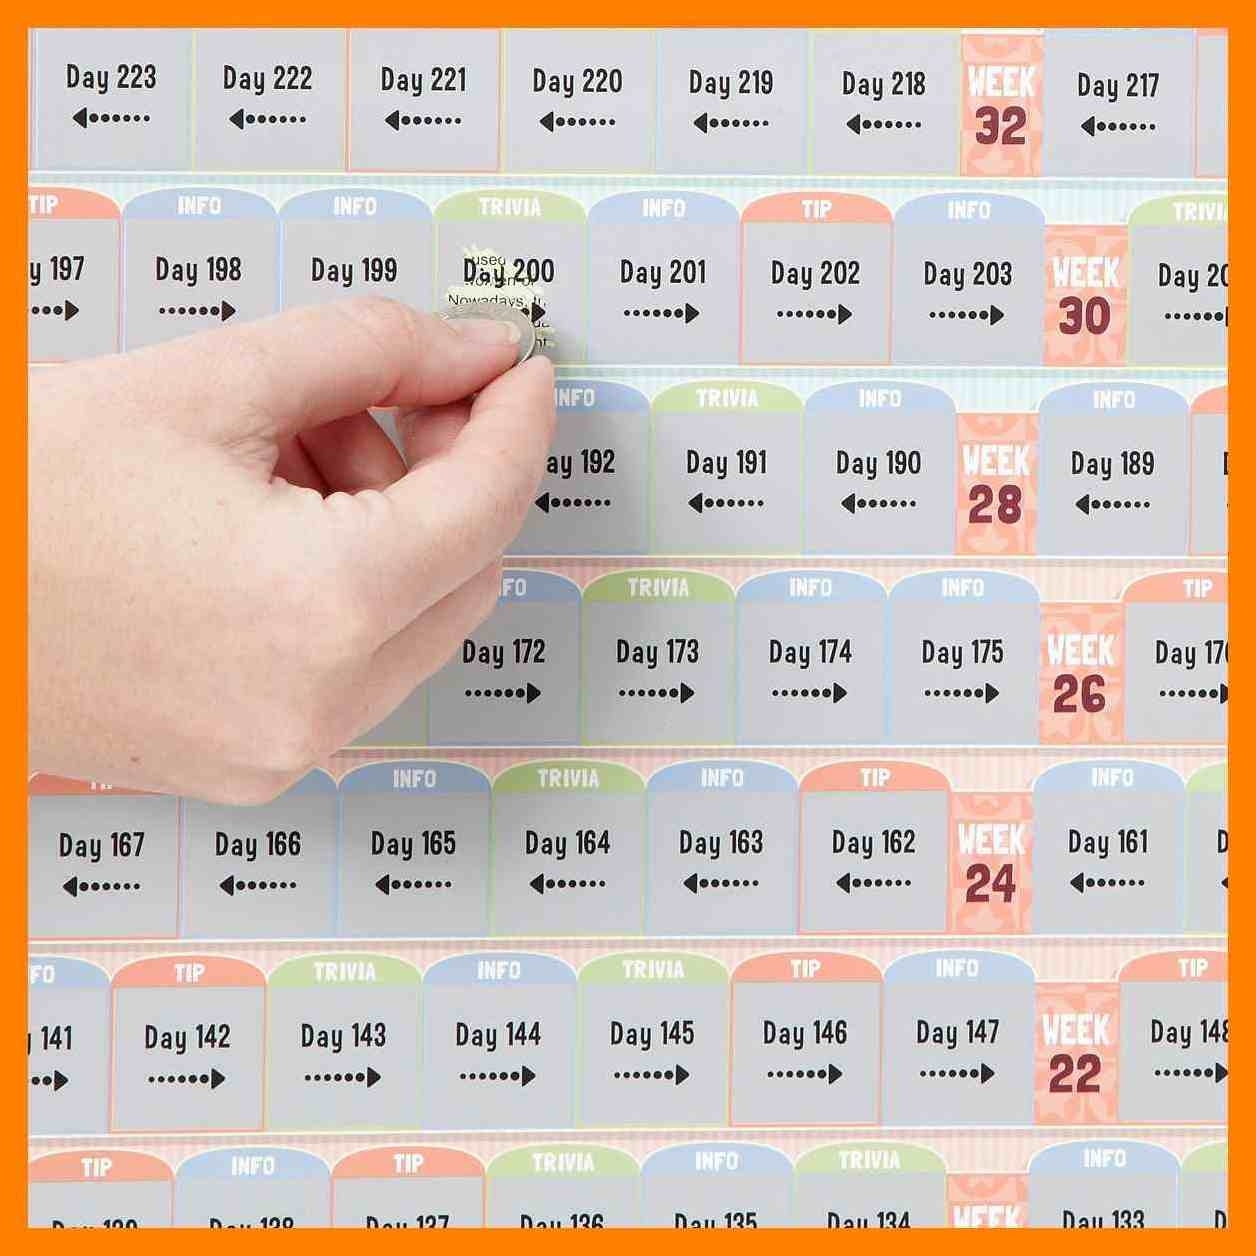 15+ Pregnancy Calendarday | Stretching And Conditioning pertaining to Pregnancy Calender Day By Day